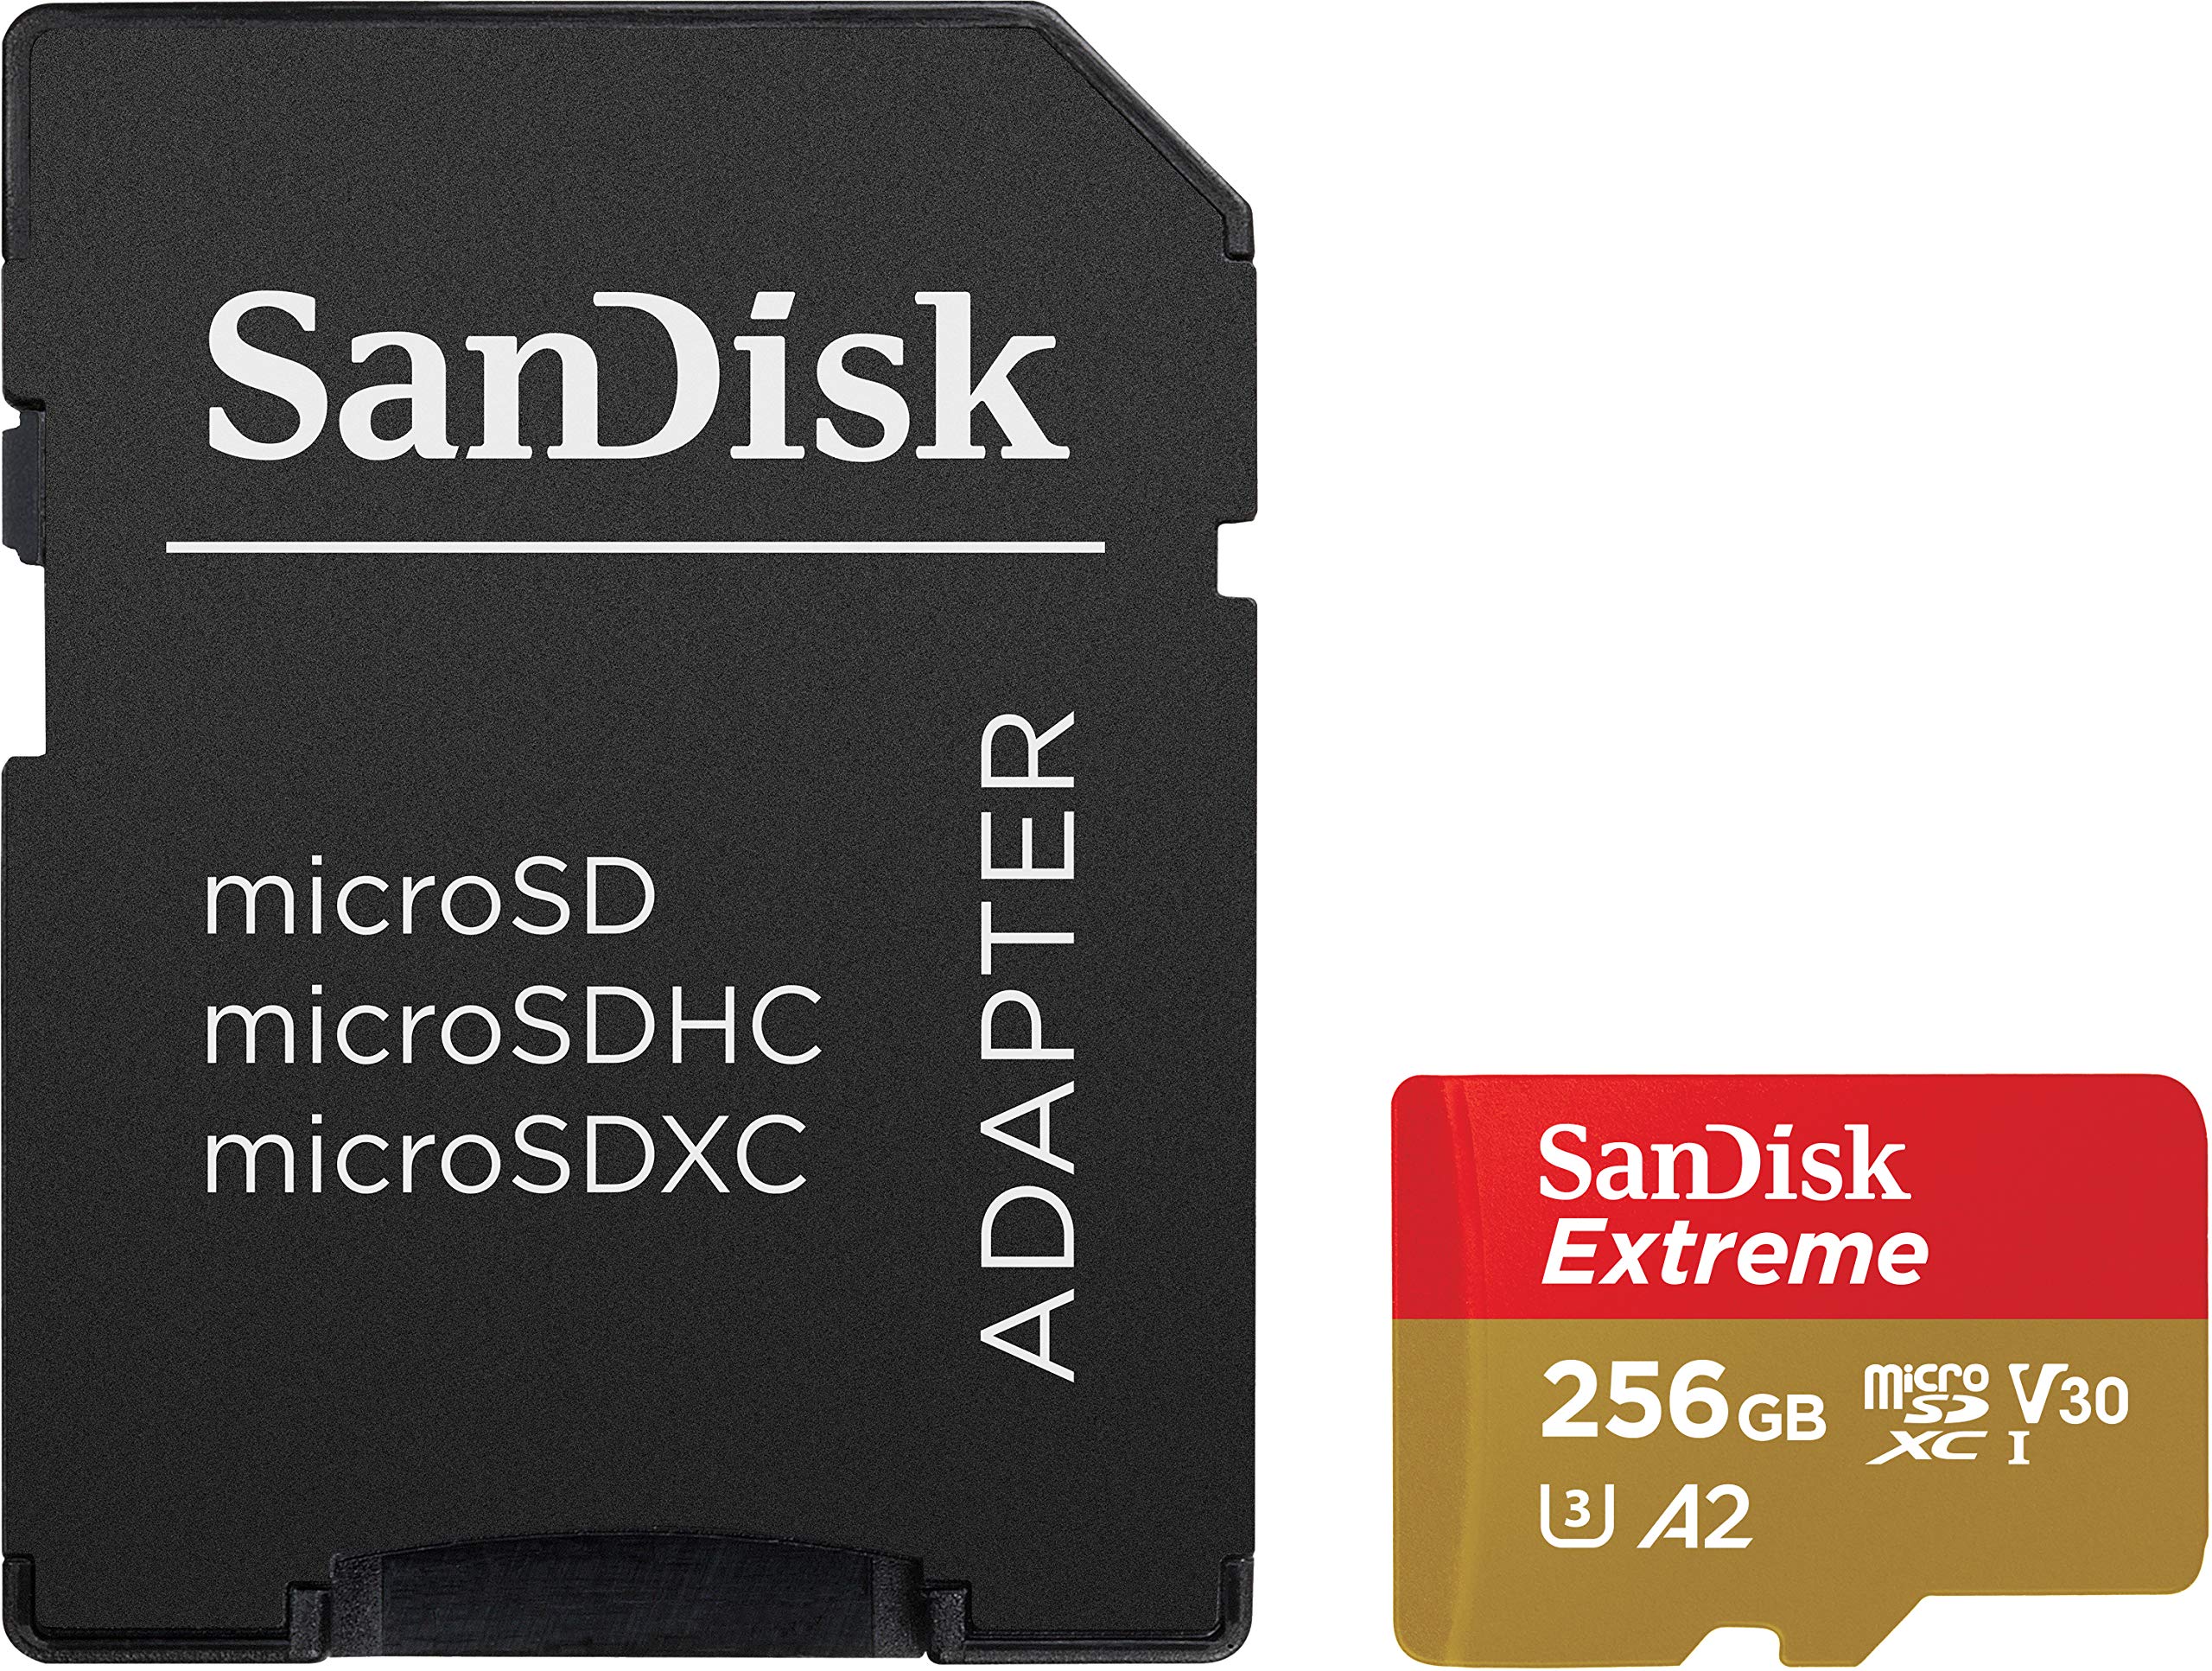 SanDisk 256GB Extreme microSD UHS-I Card with Adapter - U3 A2 - SDSQXA1-256G-GN6MA